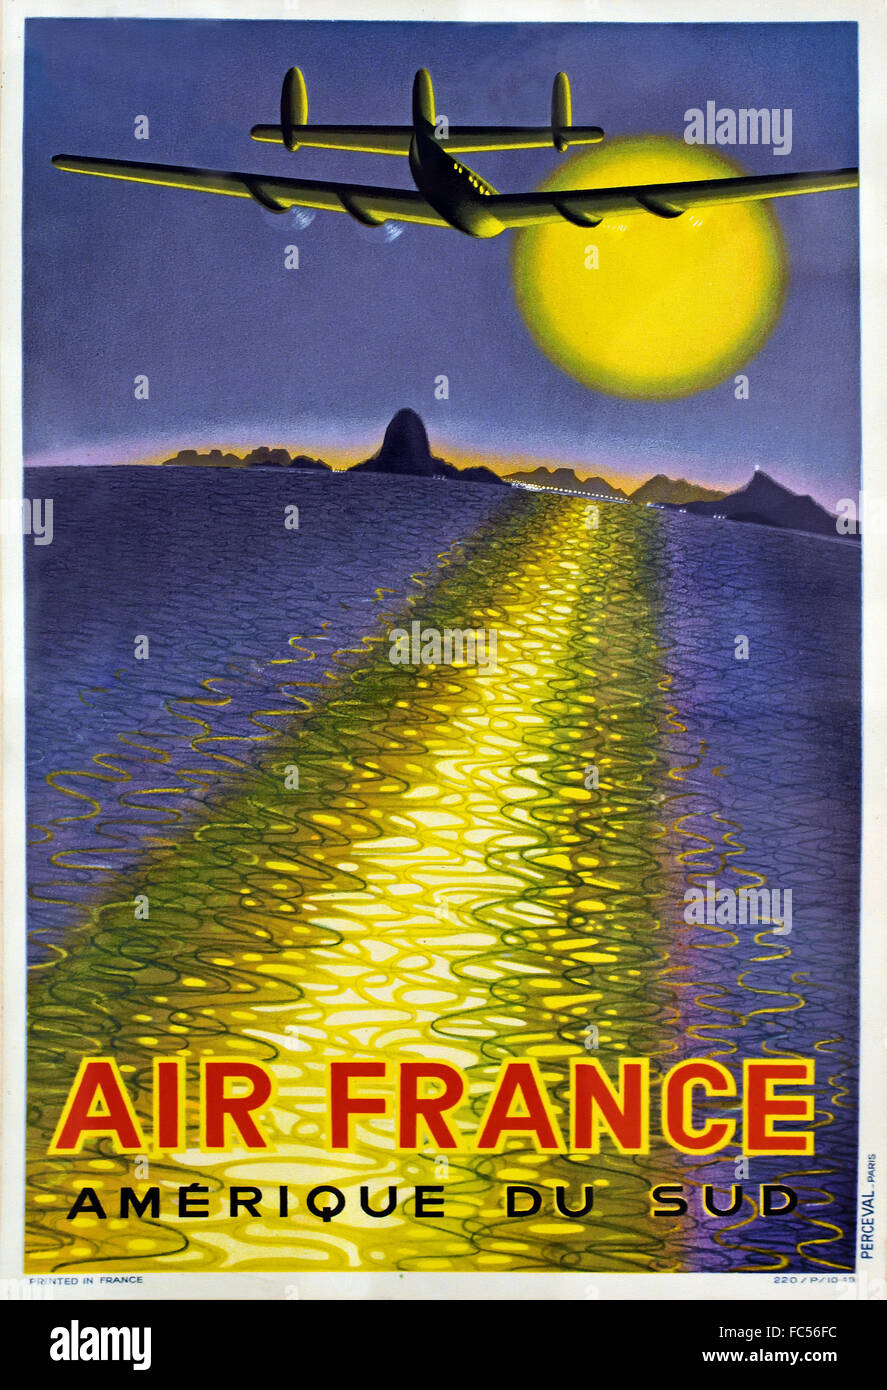 Air France America du Sud - South America 1948 Victor Vasarely  1908-1997 Painter France  Hungarian French Hungaria Stock Photo